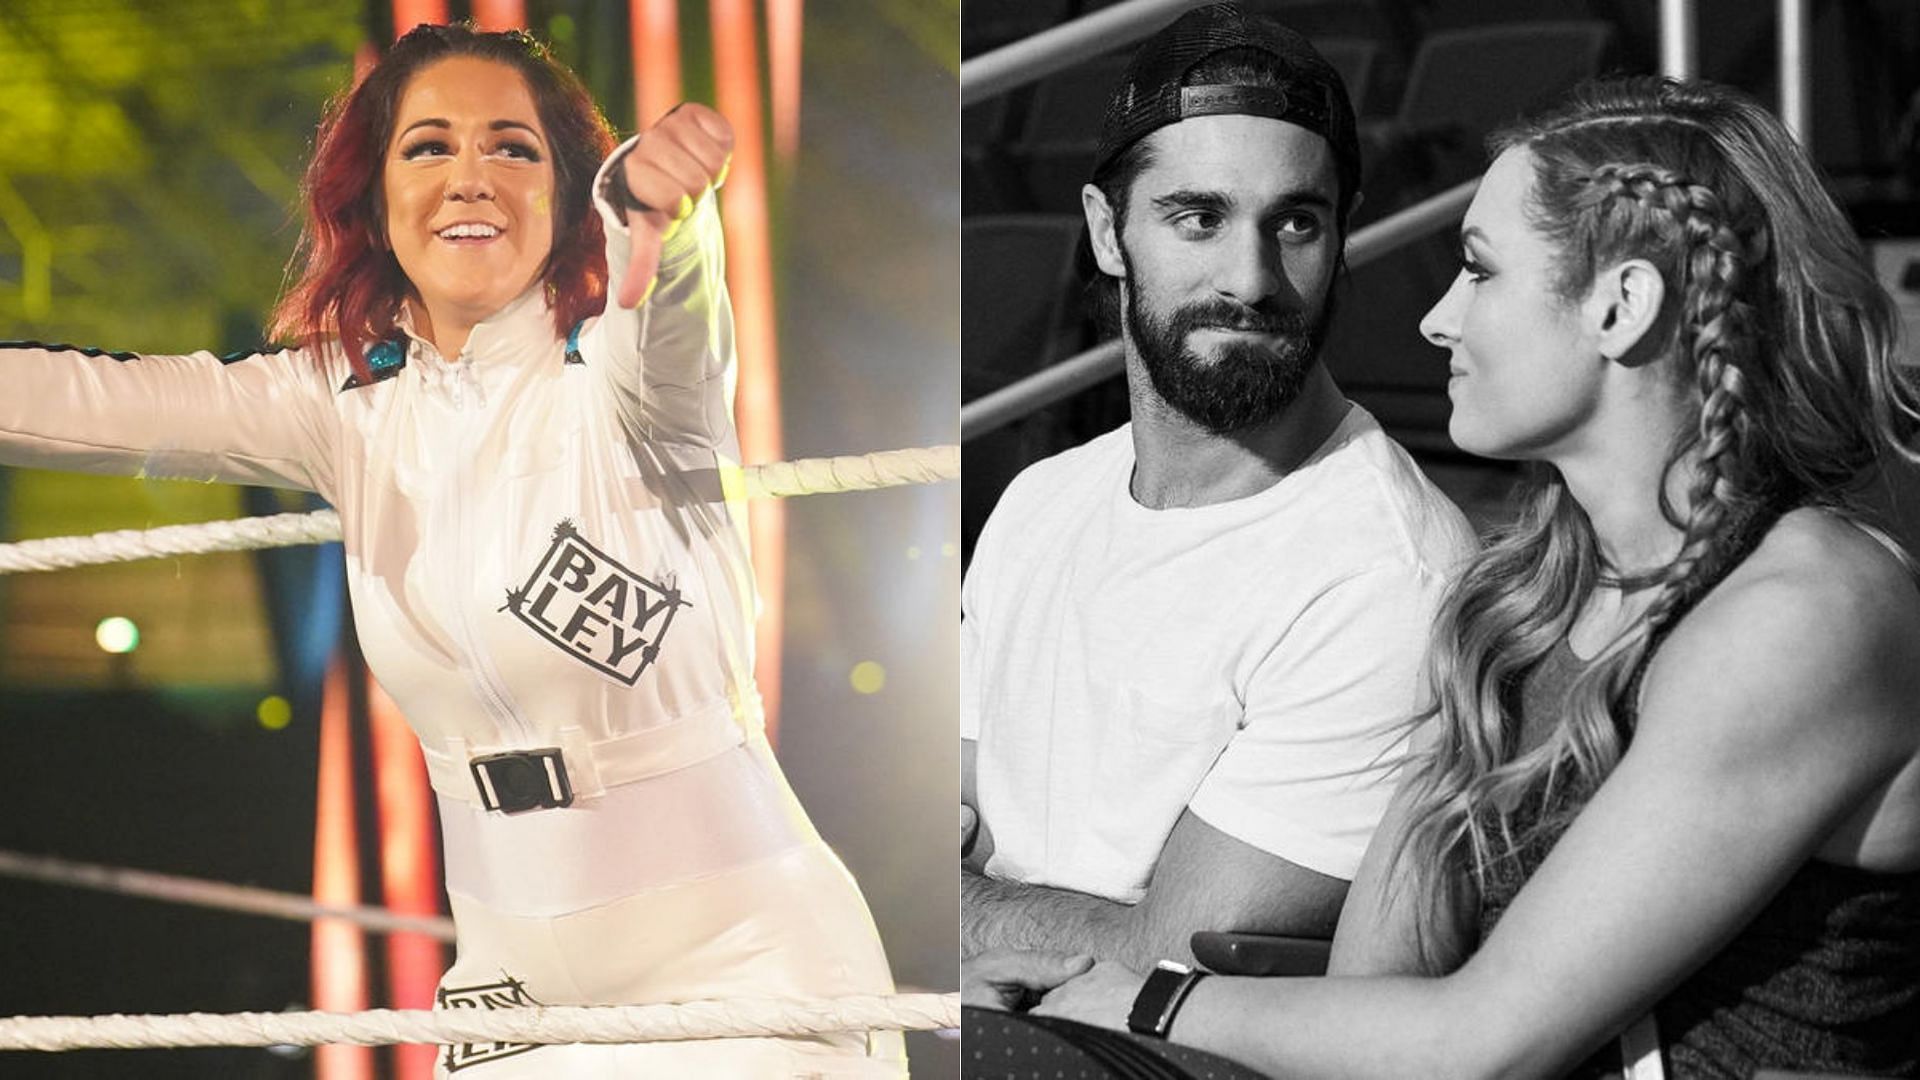 Bayley's History With Becky Lynch's Husband Seth Rollins, Explained